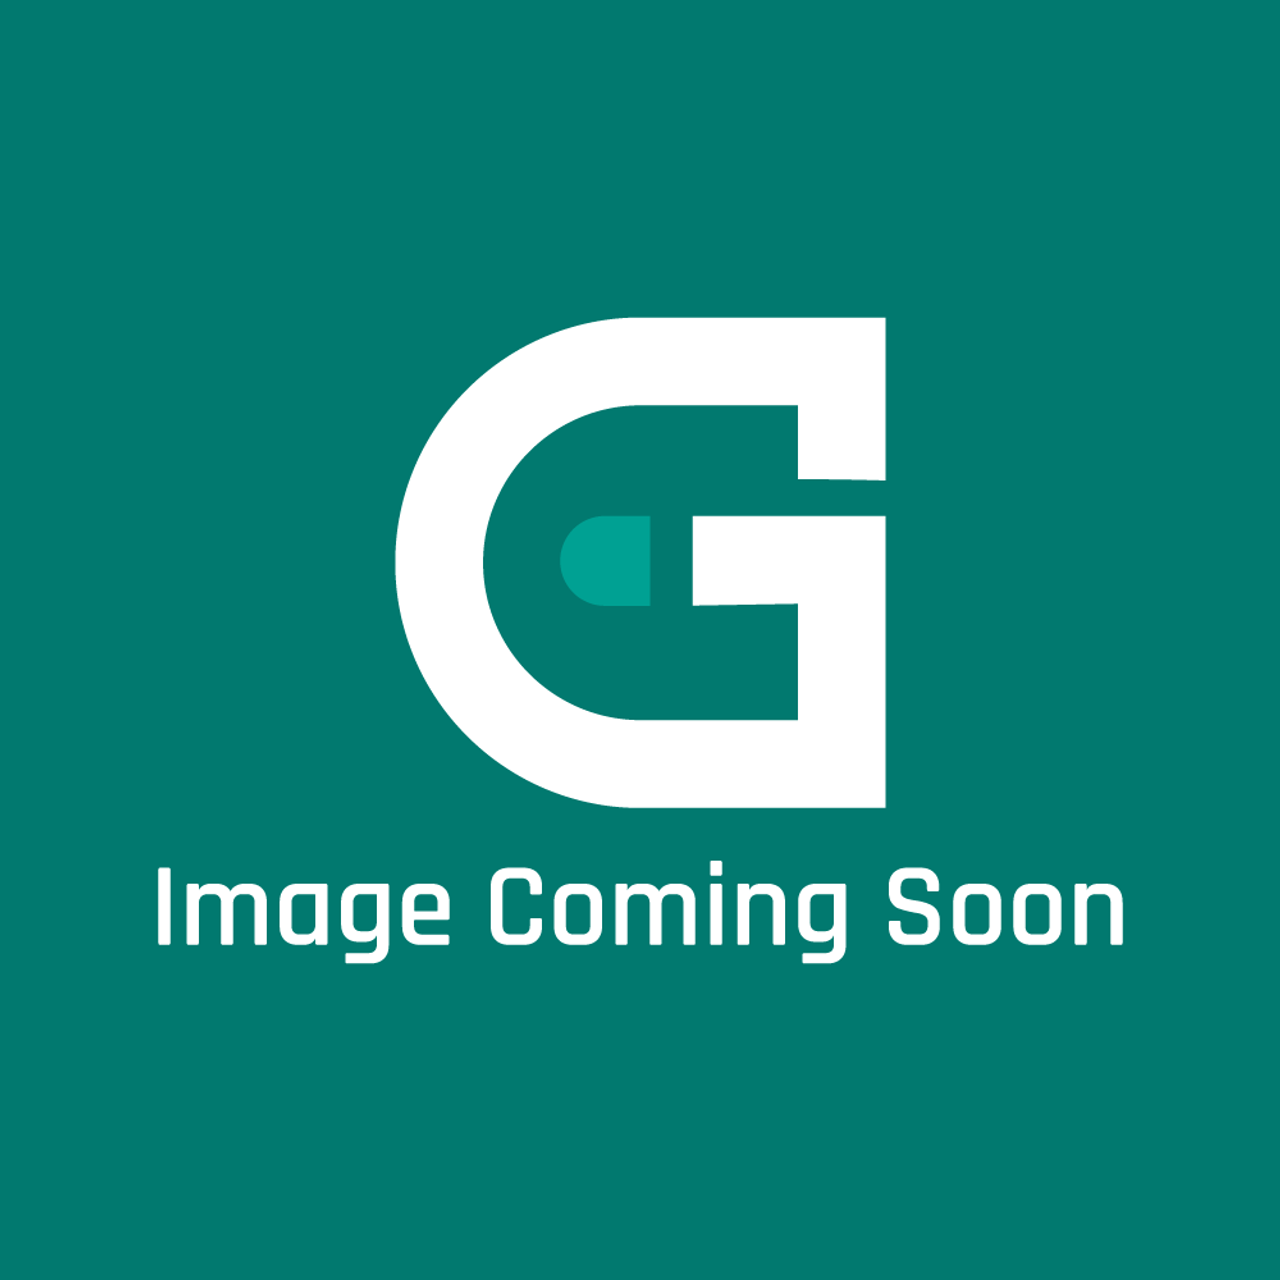 Star Mfg 2M-302974 - Faceplate Griddle - Image Coming Soon!